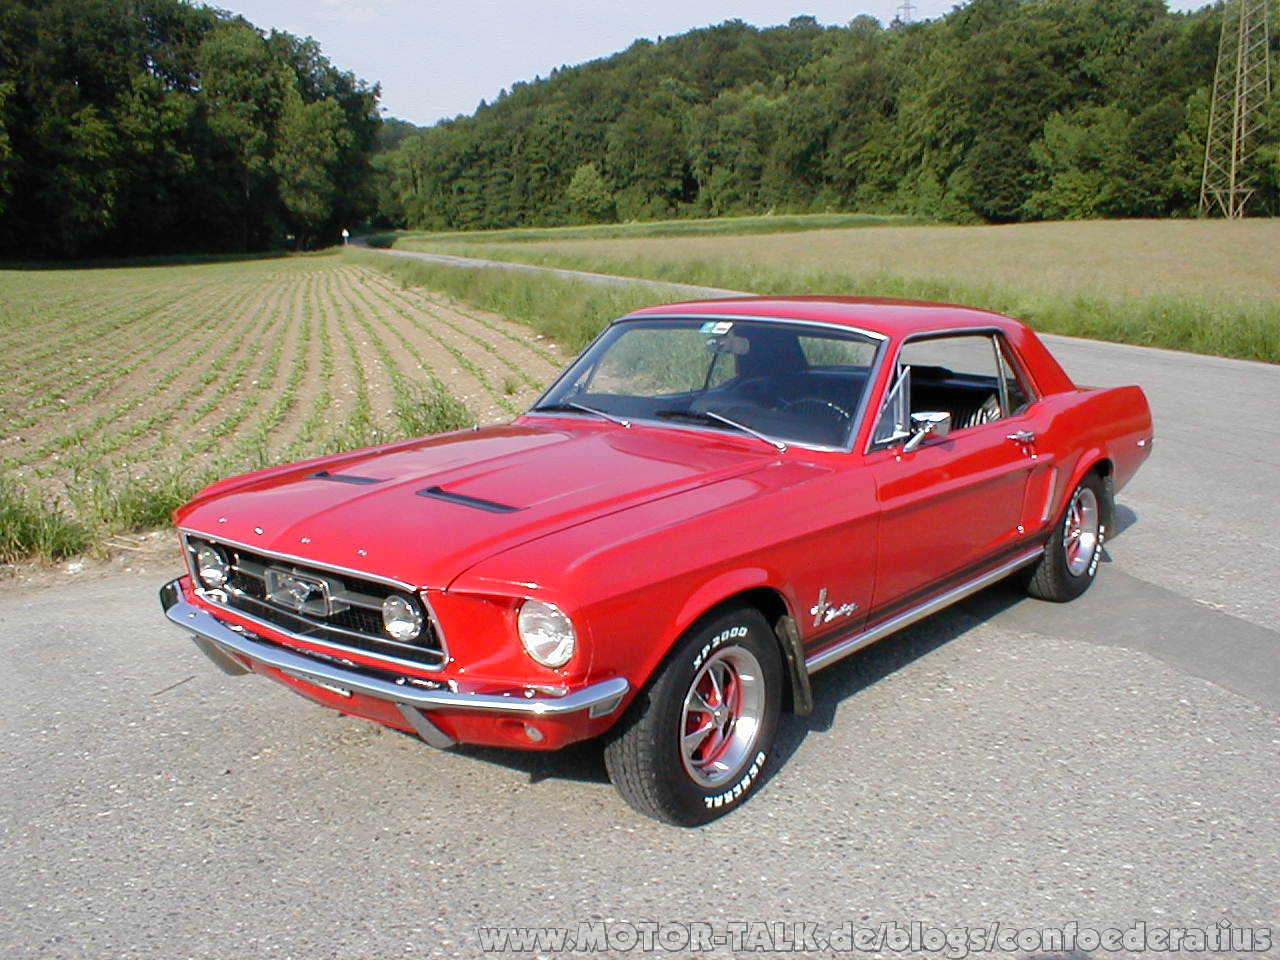 1968 Ford Mustang for Sale on ClassicCars.com - 98 Available